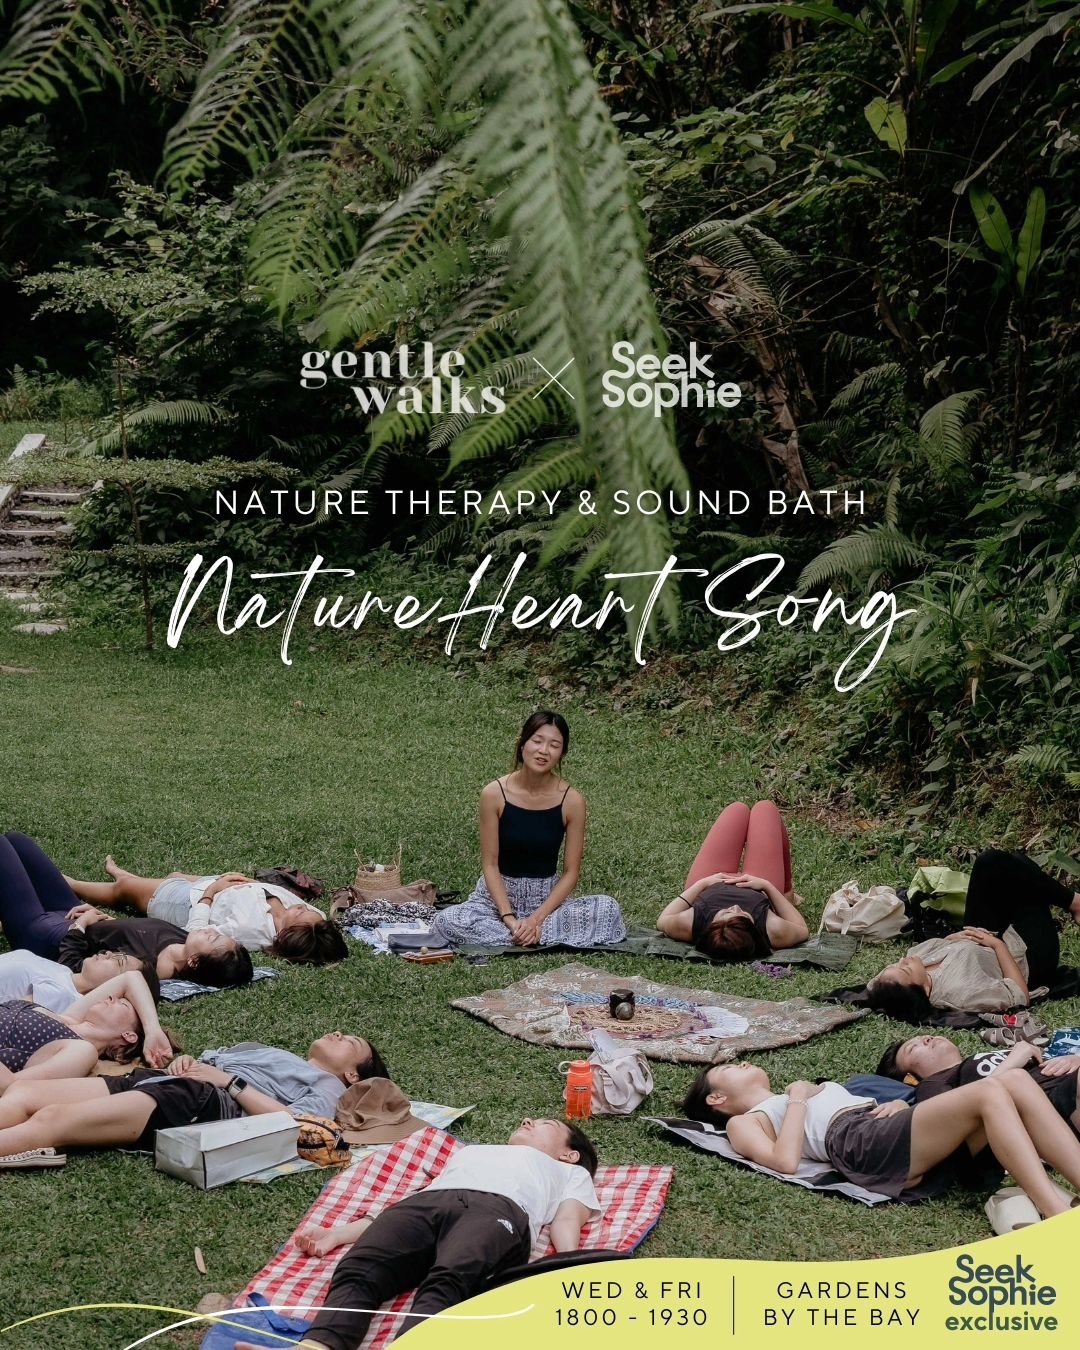 Take a tranquil journey away from the city noise and ease into nature's heart song. You will be guided to slow down your mind, relax your body and rest into a soulful sound experience.

Enjoy deep rejuvenation as you fade into the harmony of trees ru